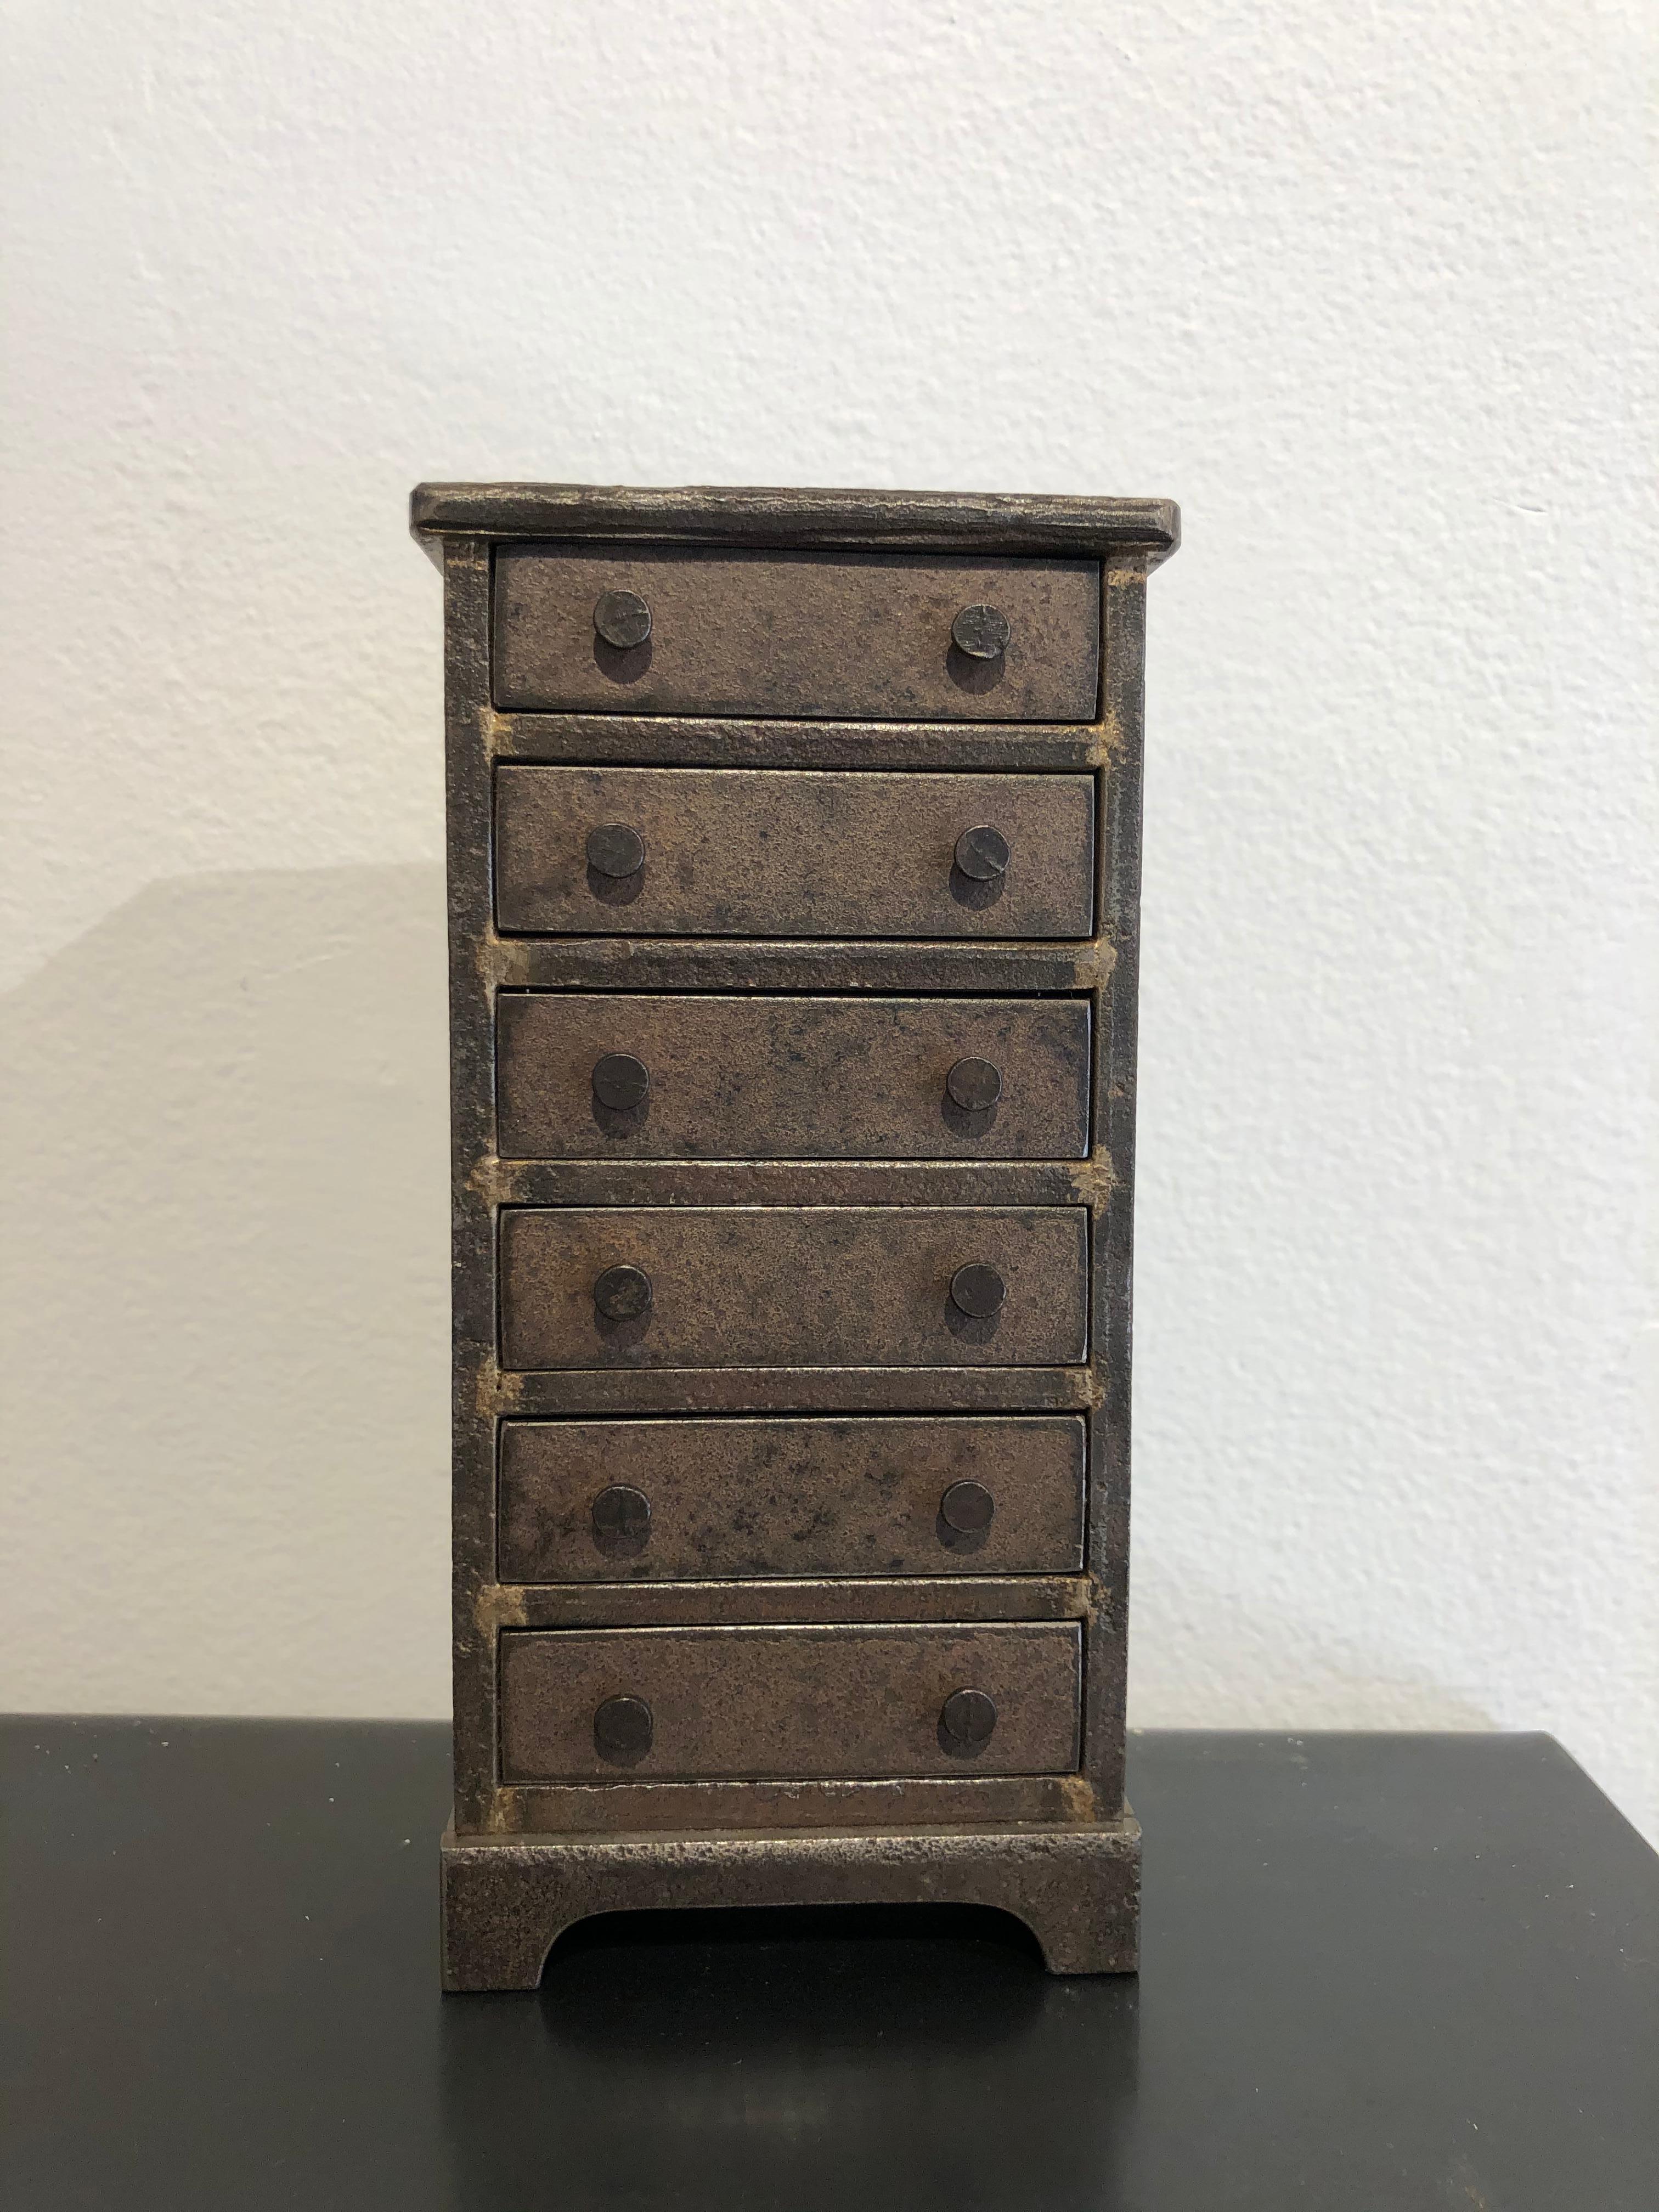 This exquisite miniature chest of drawers is inspired by Shaker furniture. Made from welded steel with a natural rust patina and vintage nail-heads for the pulls, this chest has fully functioning drawers. Despite it's small size, it makes quite an